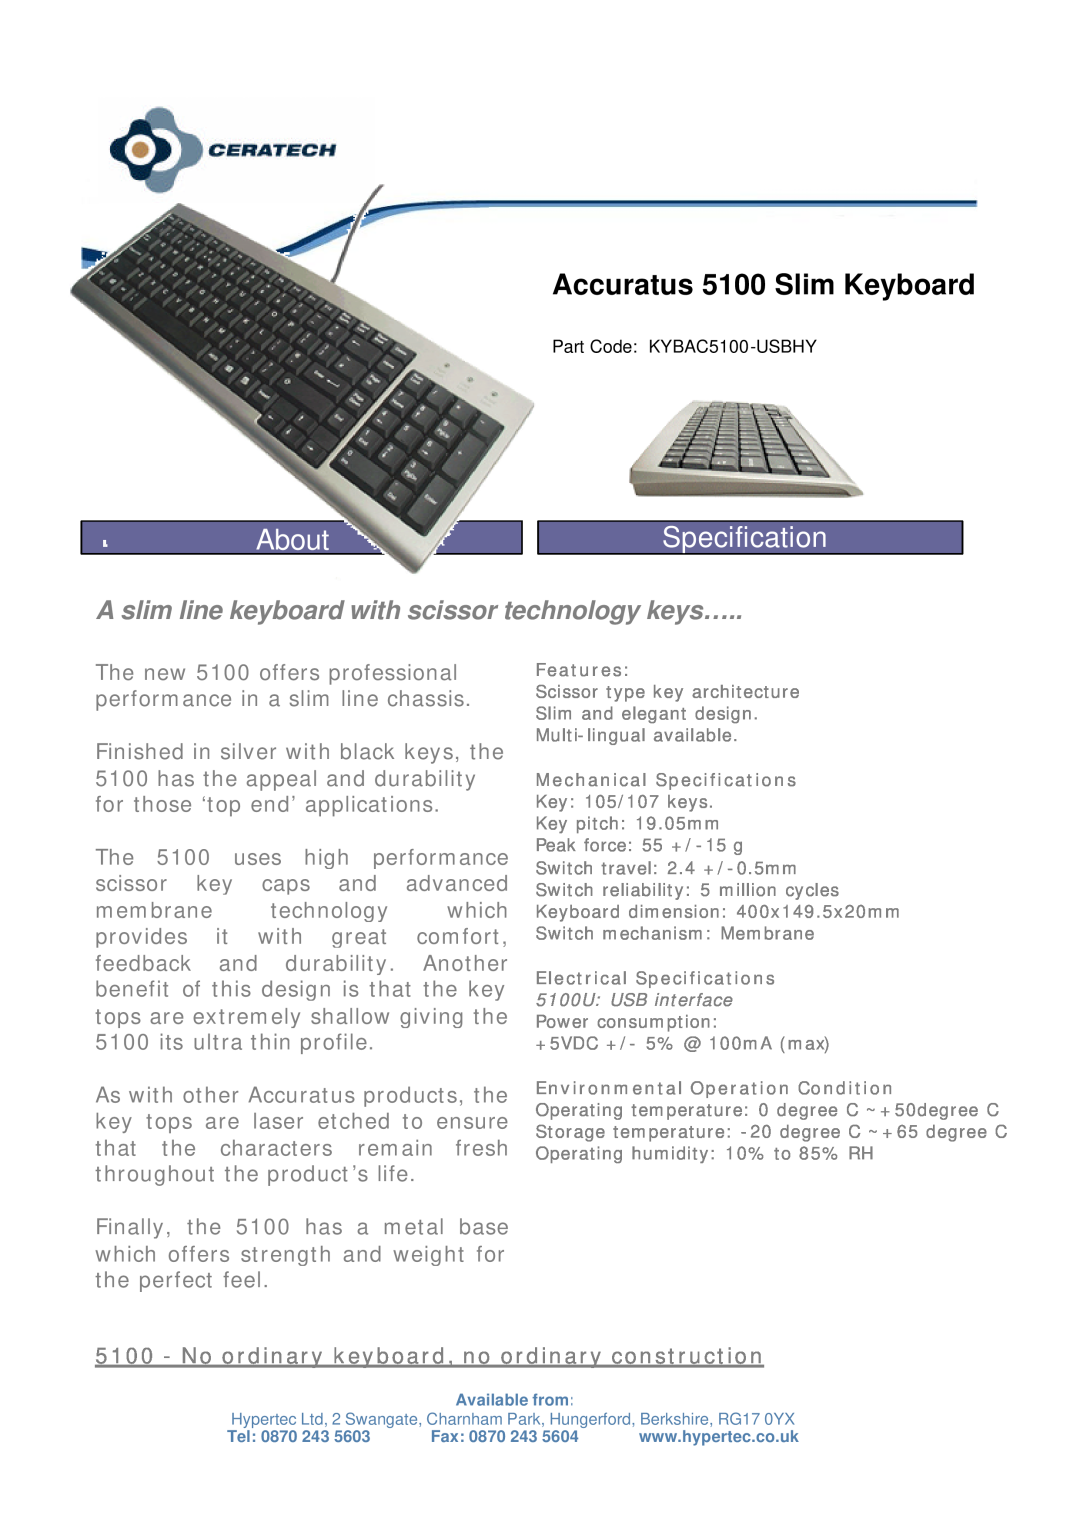 Hypertec specifications About, Accuratus 5100 Slim Keyboard, Specification 